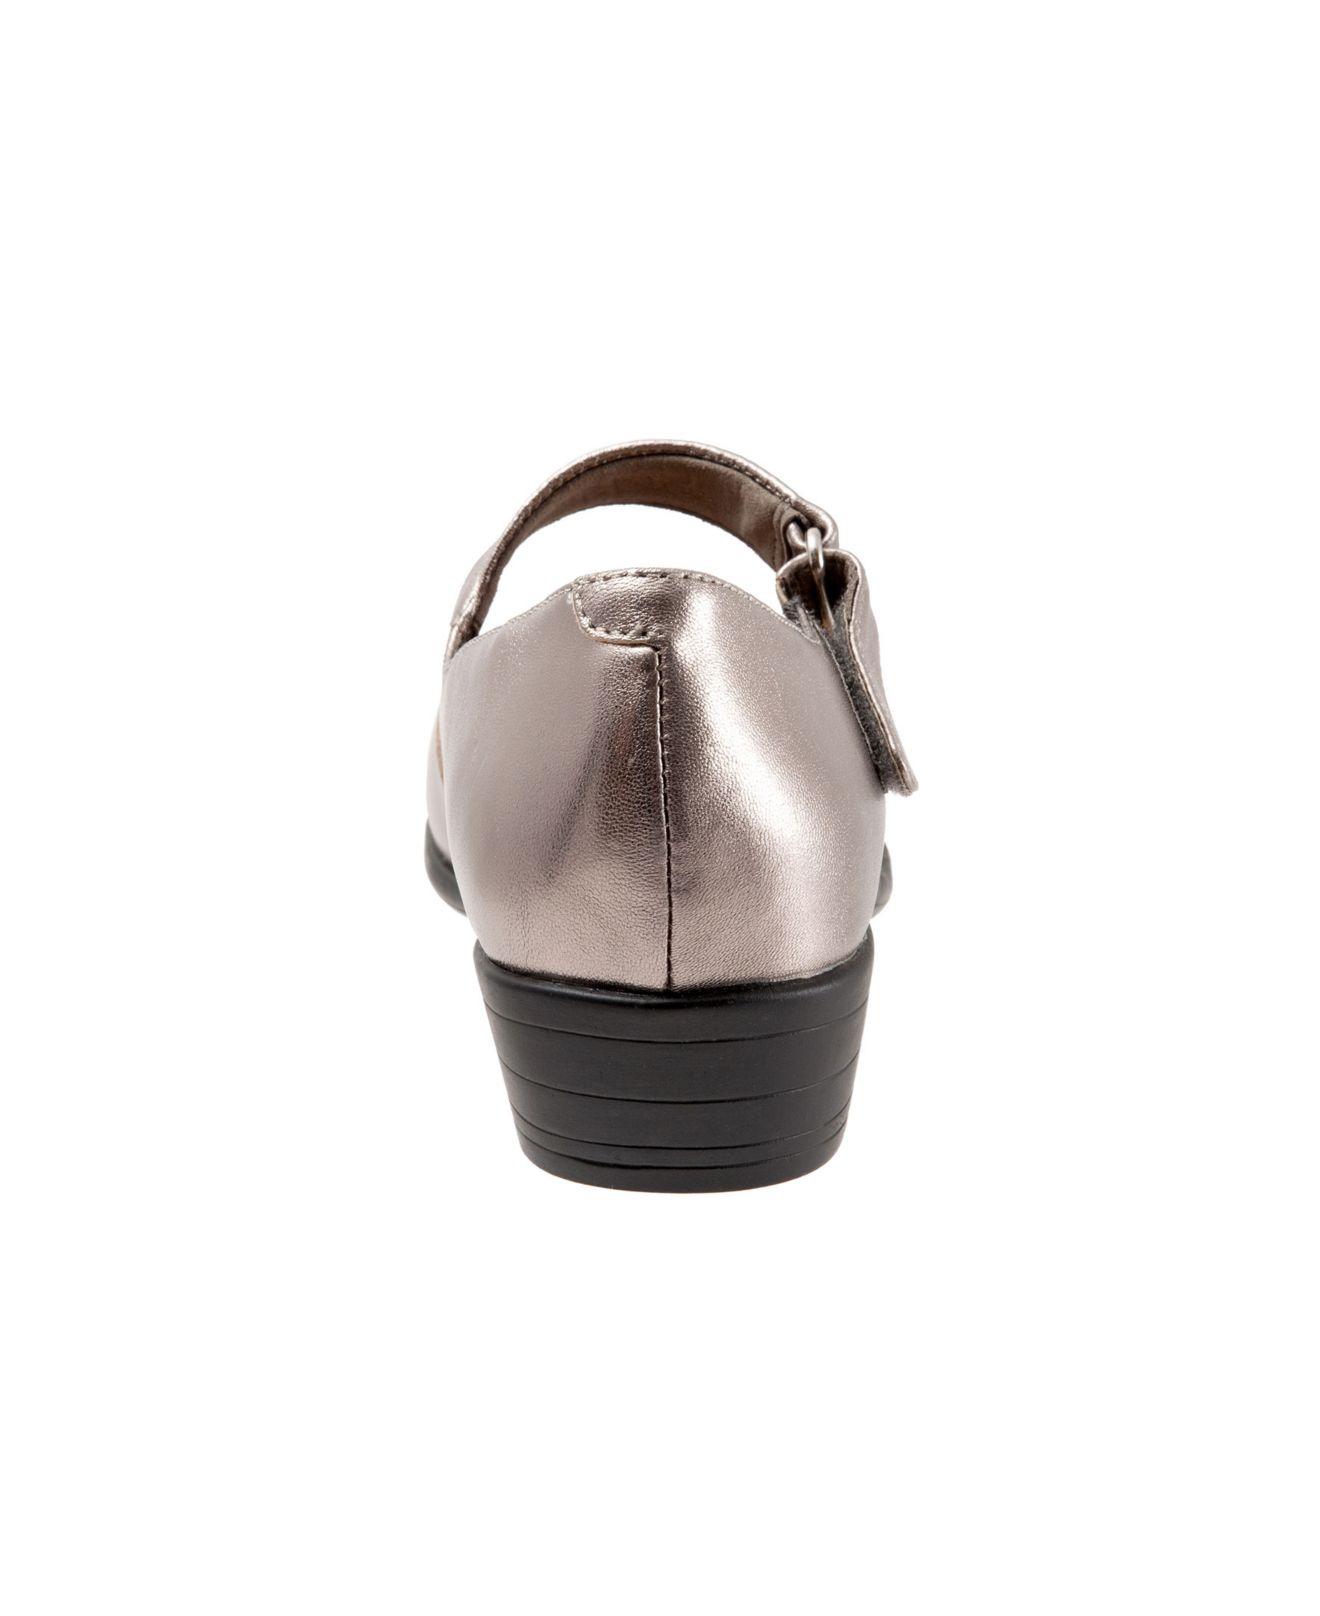 Trotters Rona Mary Jane Shoe | Lyst